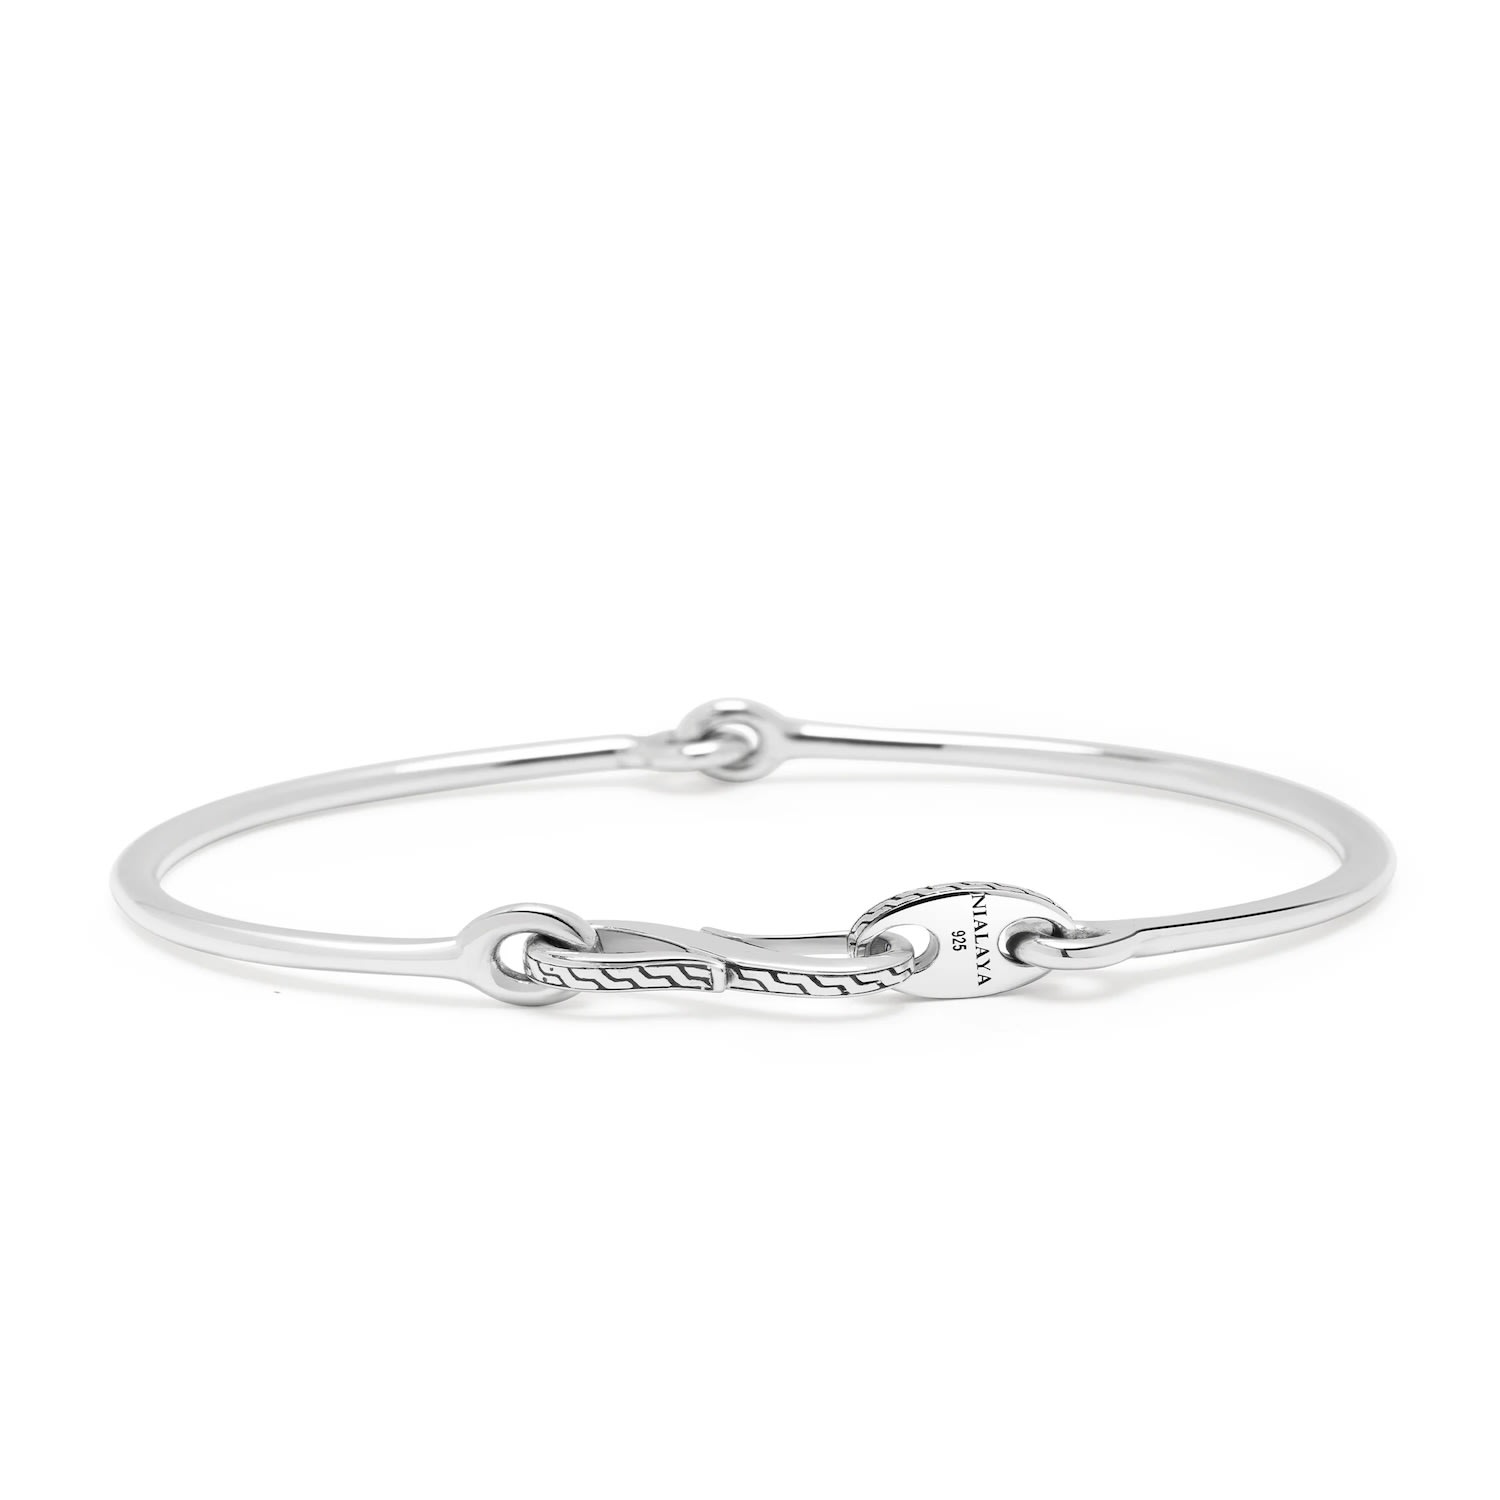 Men’s Delicate Sterling Silver Bangle With Hook Clasp Nialaya